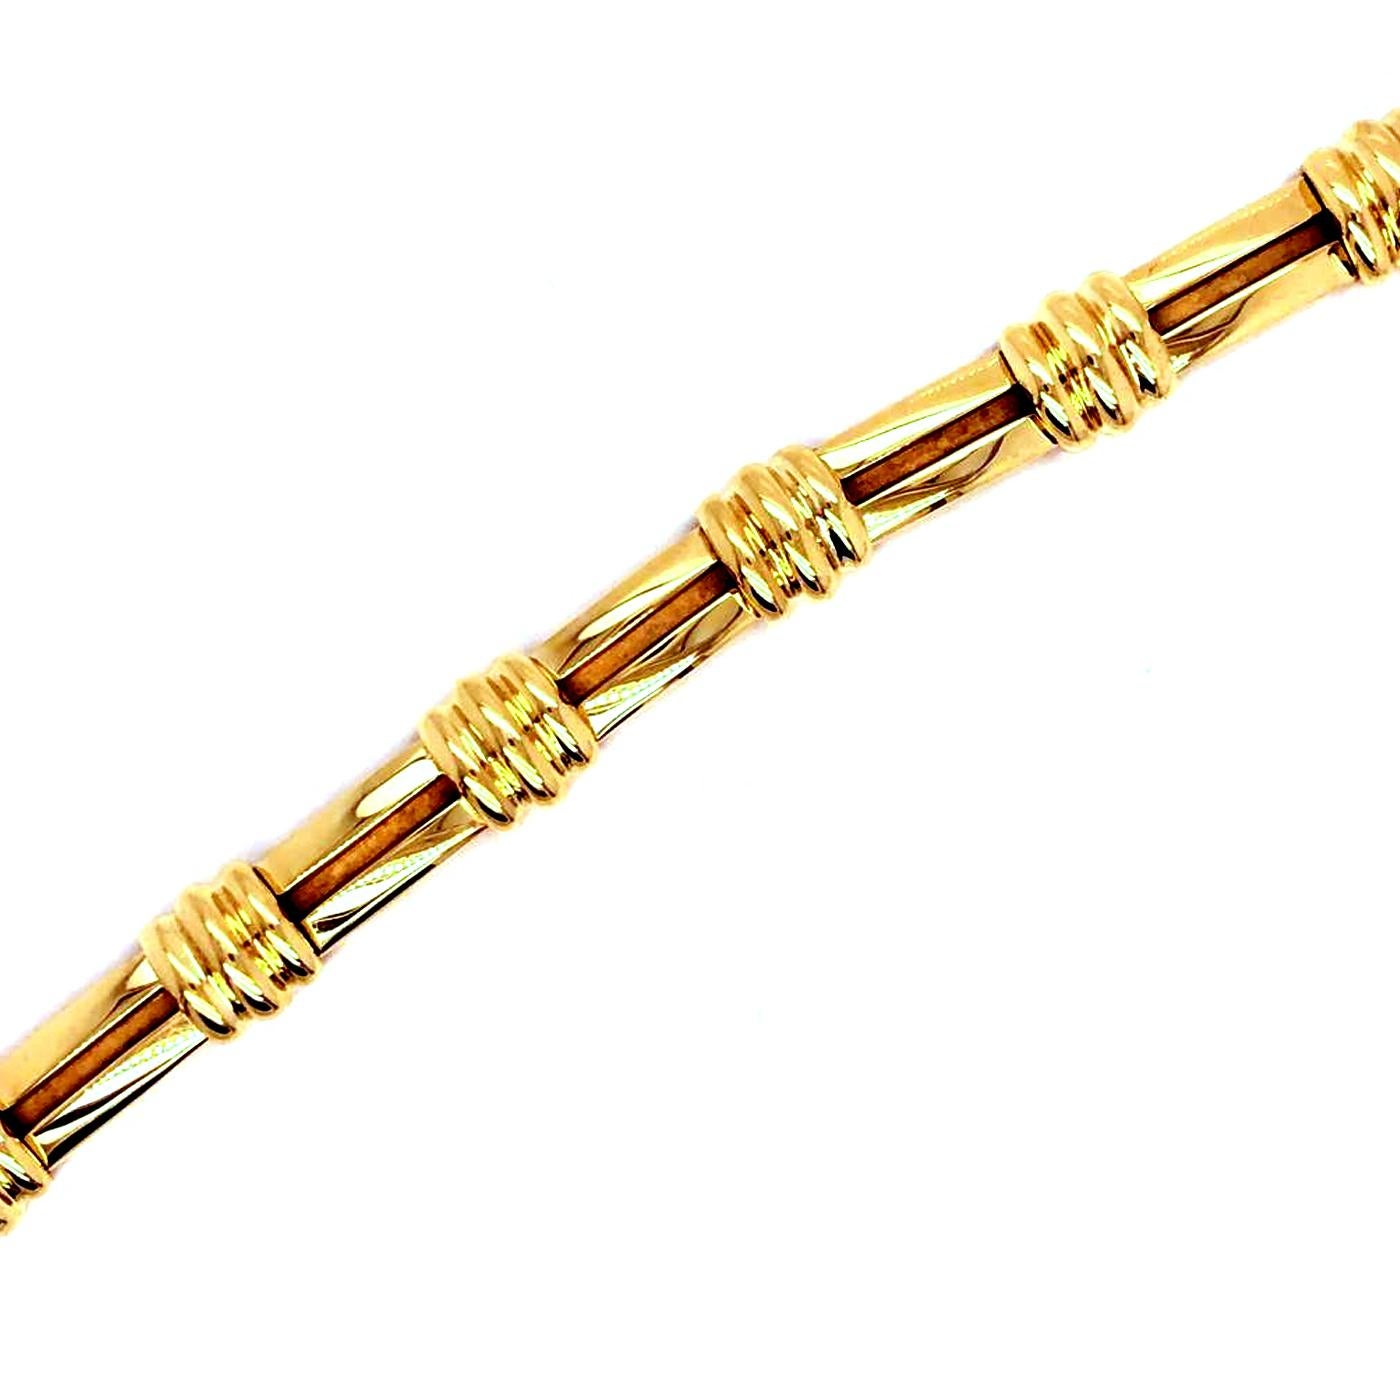 Rare Vintage circa 1995 Authentic Tiffany & Co. 18K Yellow Gold Link Bracelet from Atlas collection in excellent condition. Secure push-button double lock clasp in excellent working order. The Bracelet is appx. 7.5 - 11 mm wide and 7